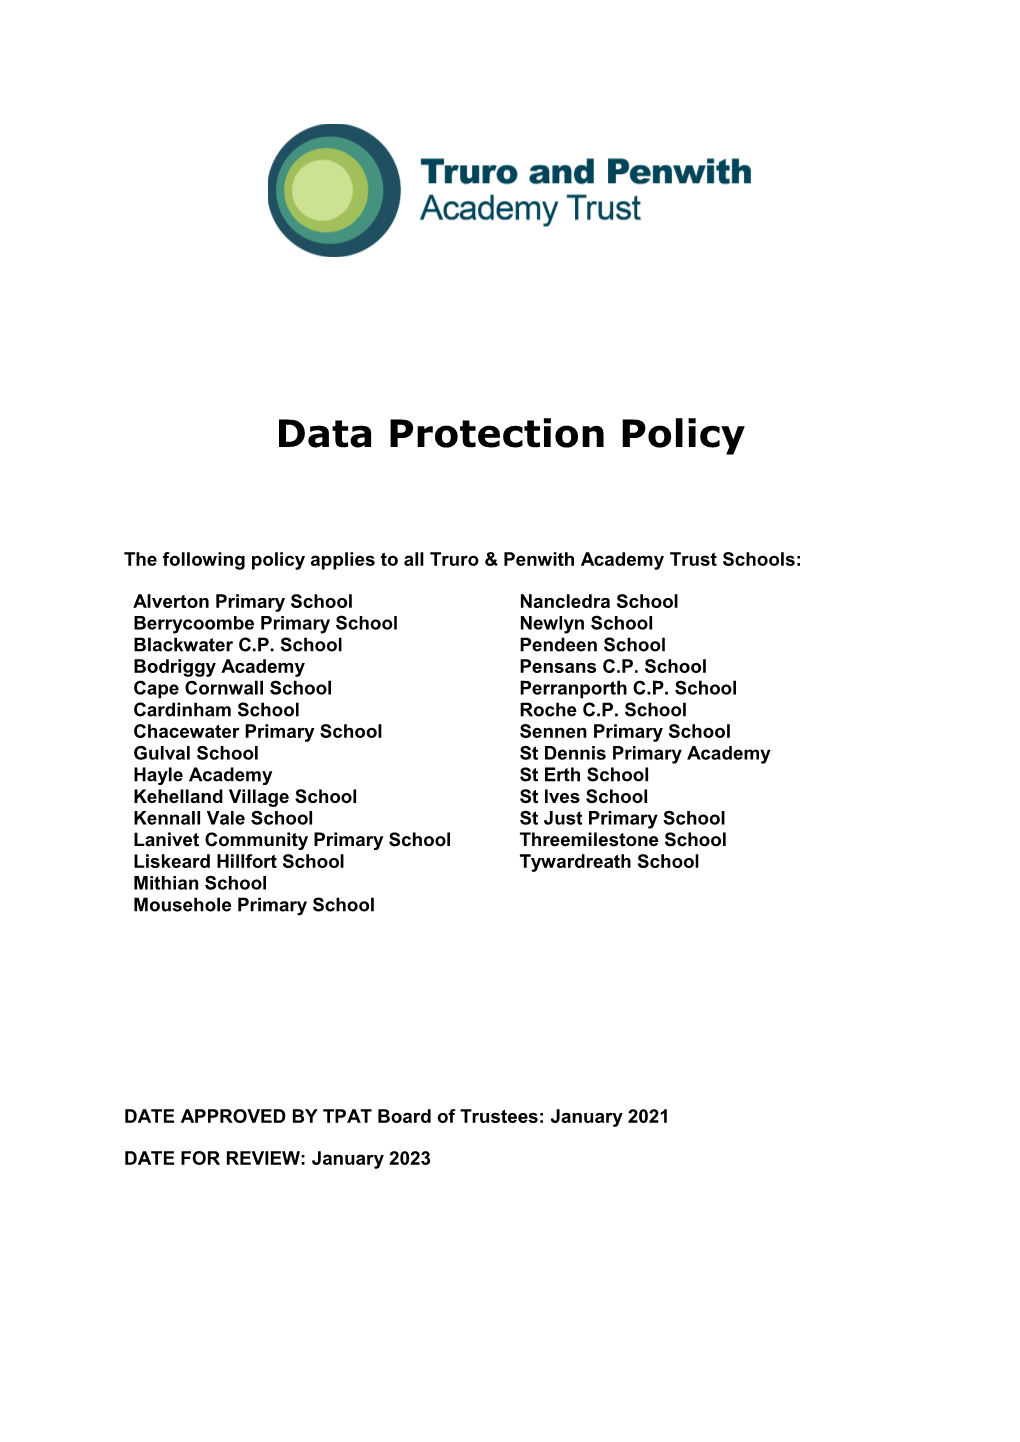 TPAT Data Protection Policy 2021-2023